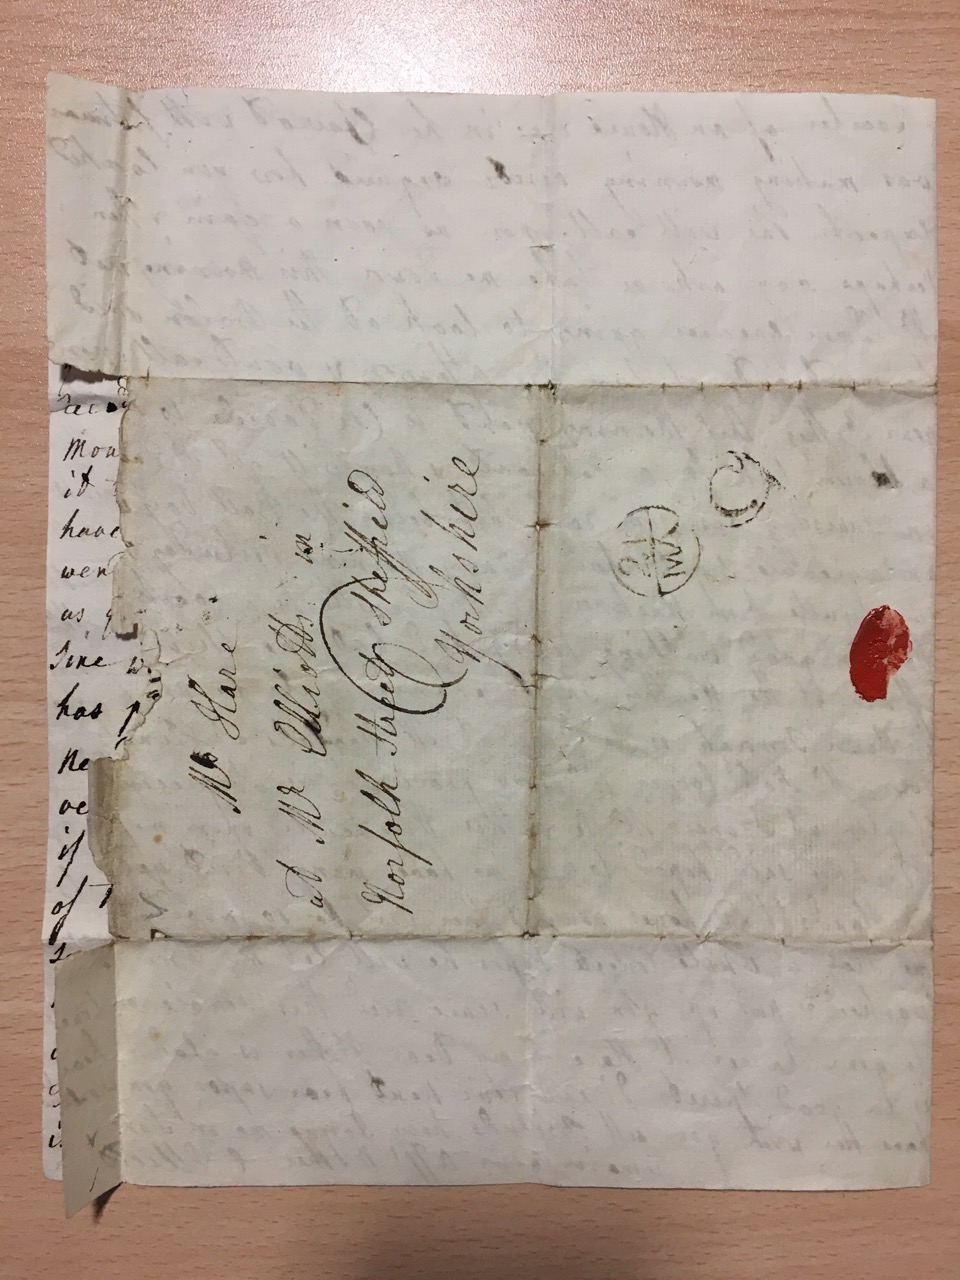 Image #4 of letter: Catherine Elliott to Ann Hare, 21 May 1785